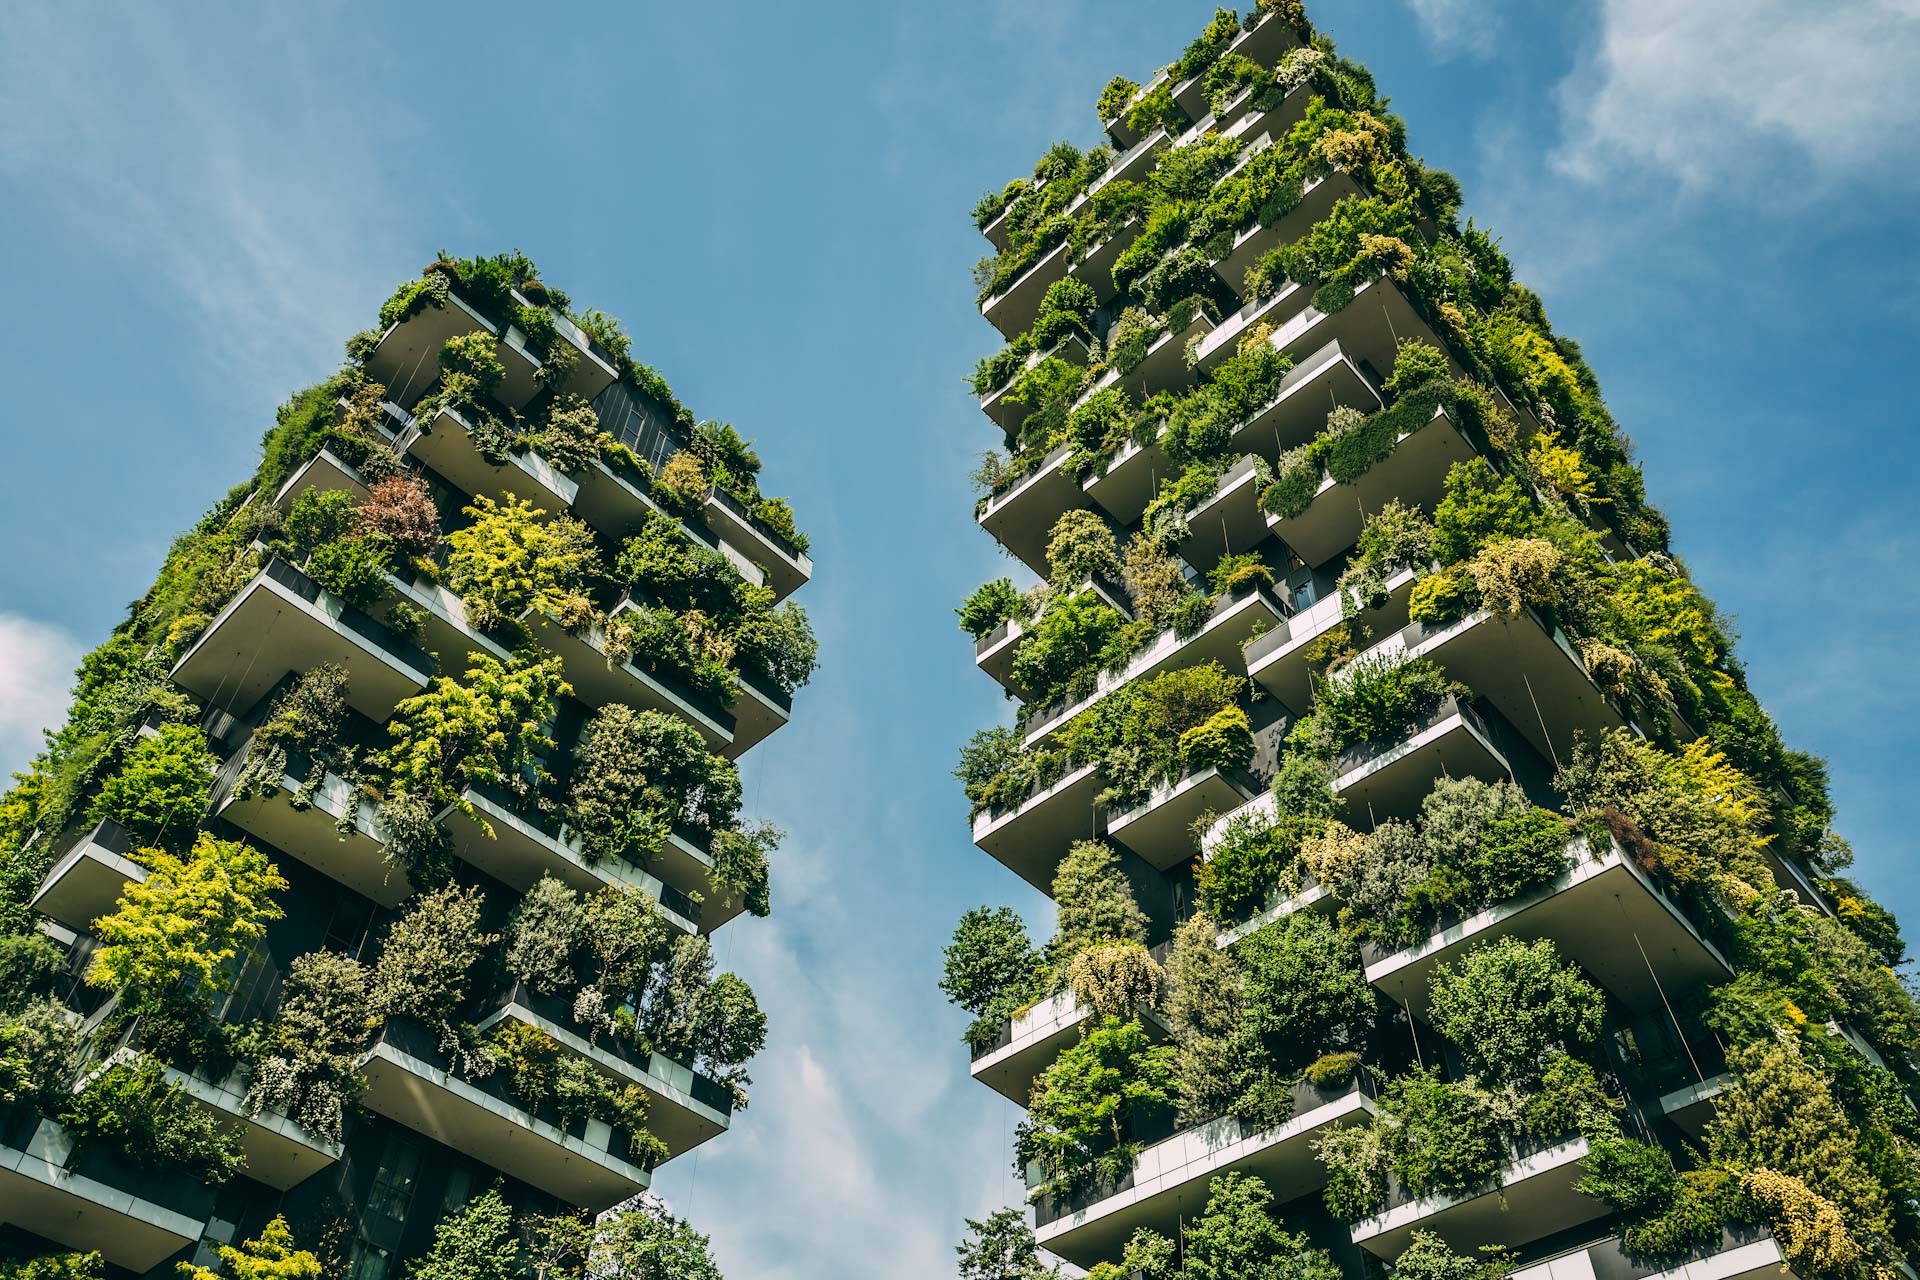 Utrechts New Vertical Forest Will Be Home To 10000 Plants And Trees